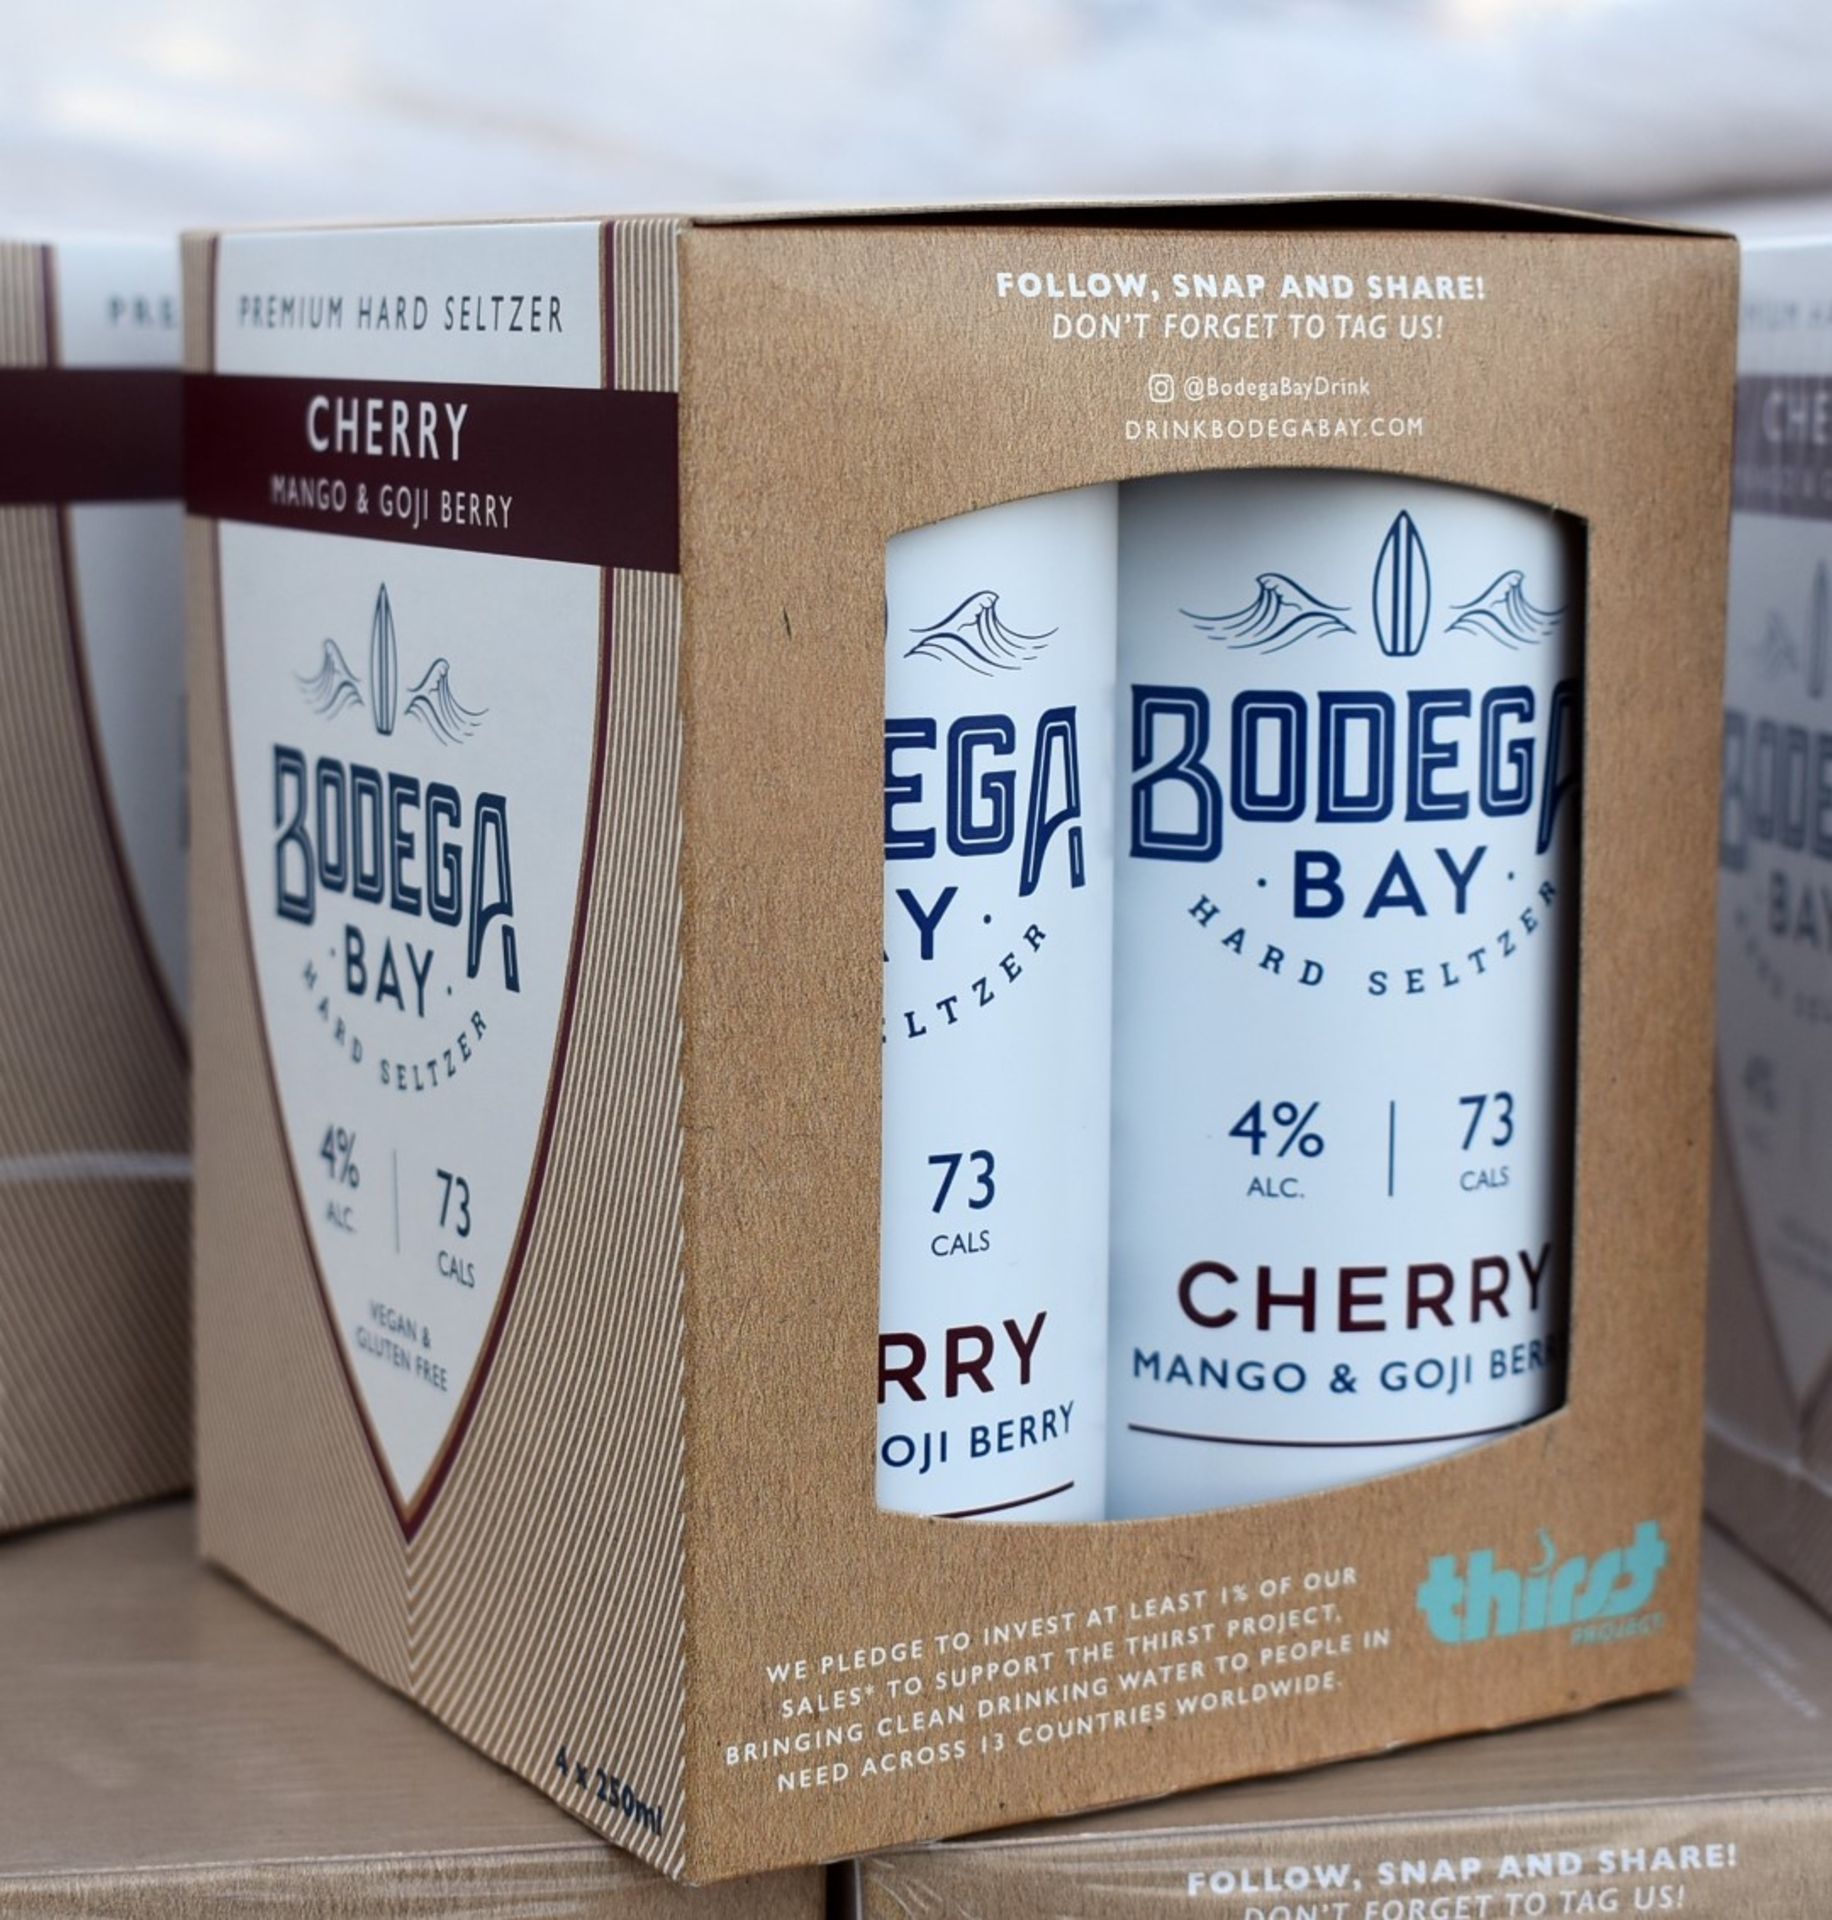 360 x Cans of Bodega Bay Hard Seltzer 250ml Alcoholic Sparkling Water Drinks - Various Flavours - Image 8 of 15